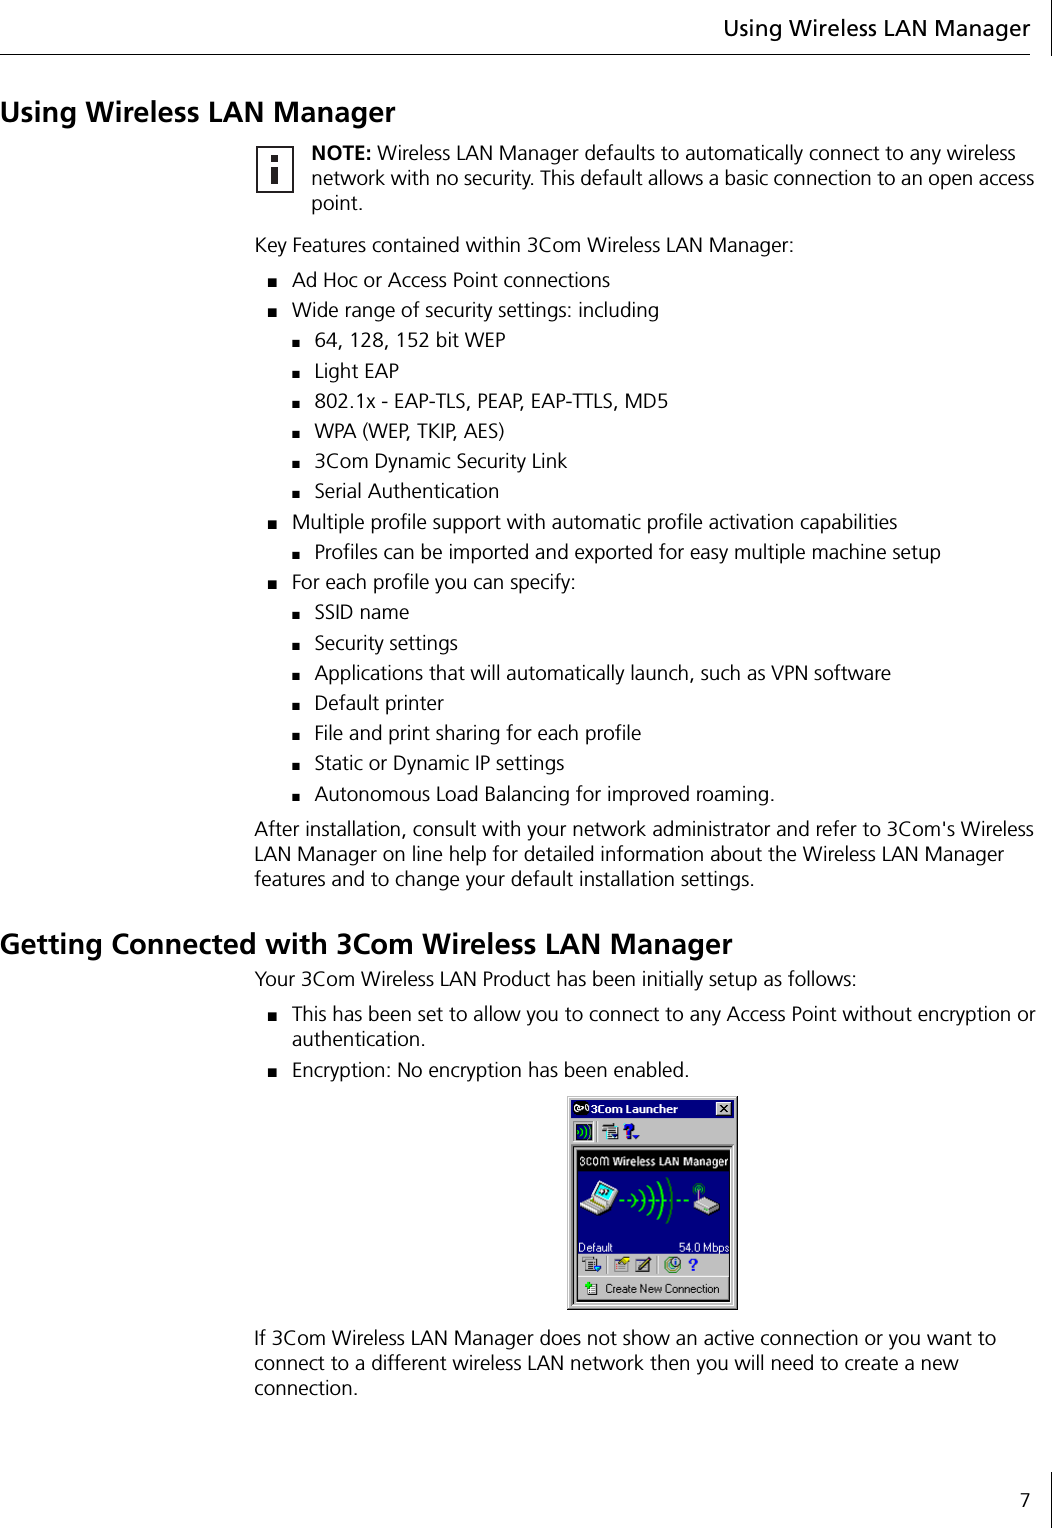 Using Wireless LAN Manager7Using Wireless LAN ManagerKey Features contained within 3Com Wireless LAN Manager:■Ad Hoc or Access Point connections■Wide range of security settings: including ■64, 128, 152 bit WEP■Light EAP■802.1x - EAP-TLS, PEAP, EAP-TTLS, MD5■WPA (WEP, TKIP, AES)■3Com Dynamic Security Link■Serial Authentication■Multiple profile support with automatic profile activation capabilities■Profiles can be imported and exported for easy multiple machine setup■For each profile you can specify:■SSID name■Security settings■Applications that will automatically launch, such as VPN software■Default printer ■File and print sharing for each profile■Static or Dynamic IP settings■Autonomous Load Balancing for improved roaming.After installation, consult with your network administrator and refer to 3Com&apos;s Wireless LAN Manager on line help for detailed information about the Wireless LAN Manager features and to change your default installation settings.Getting Connected with 3Com Wireless LAN ManagerYour 3Com Wireless LAN Product has been initially setup as follows:■This has been set to allow you to connect to any Access Point without encryption or authentication.■Encryption: No encryption has been enabled.If 3Com Wireless LAN Manager does not show an active connection or you want to connect to a different wireless LAN network then you will need to create a new connection.NOTE: Wireless LAN Manager defaults to automatically connect to any wireless network with no security. This default allows a basic connection to an open access point.